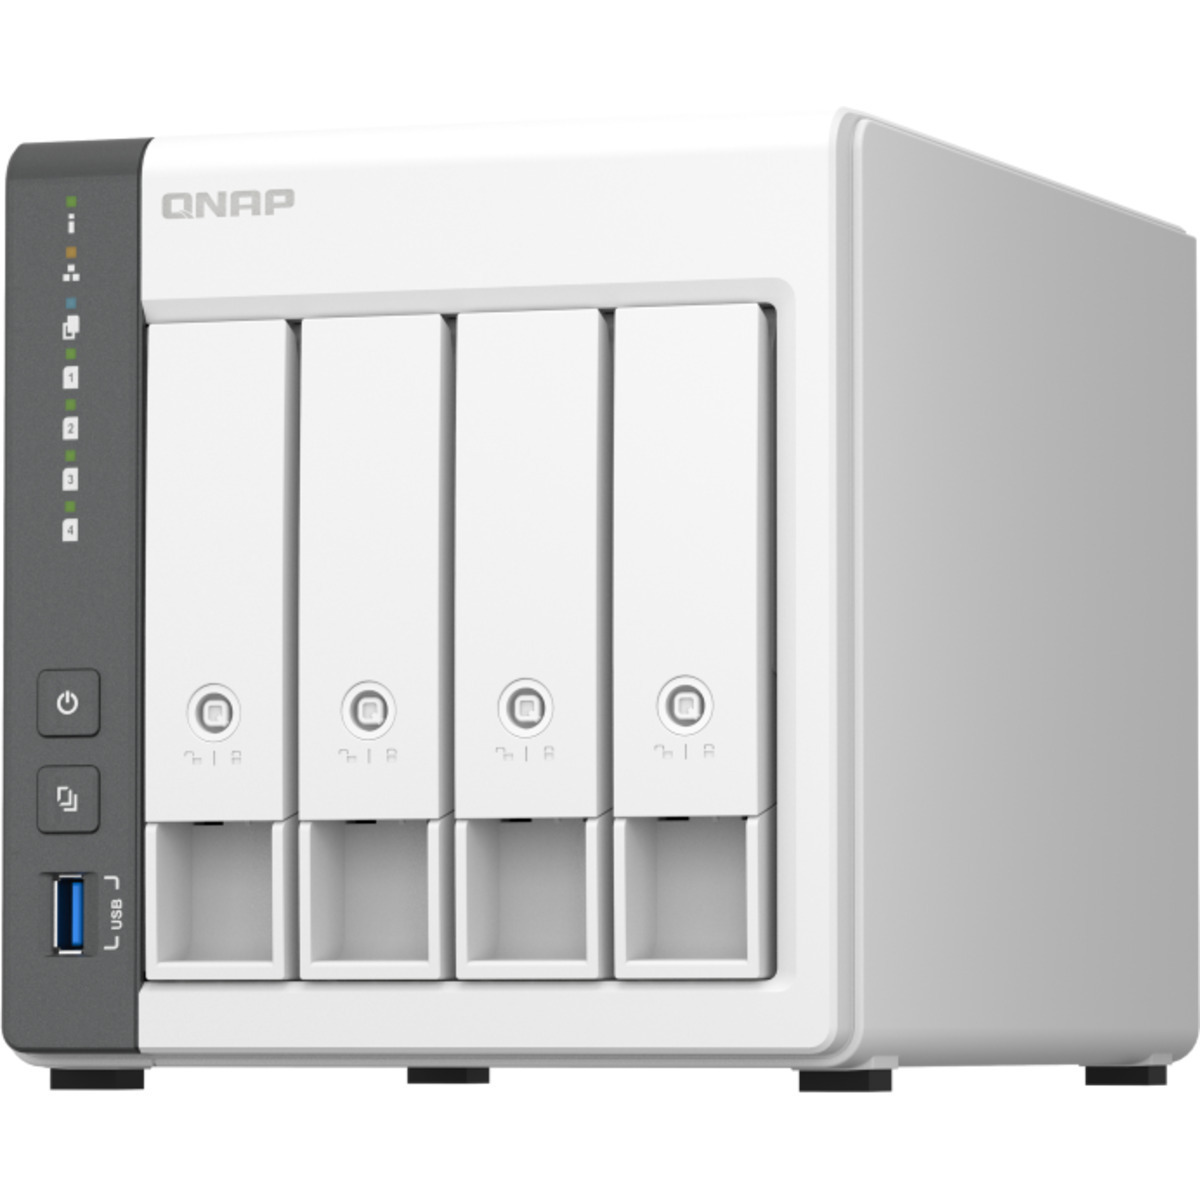 QNAP TS-433 36tb 4-Bay Desktop Personal / Basic Home / Small Office NAS - Network Attached Storage Device 3x12tb Western Digital Ultrastar DC HC520 HUH721212ALE600 3.5 7200rpm SATA 6Gb/s HDD ENTERPRISE Class Drives Installed - Burn-In Tested TS-433